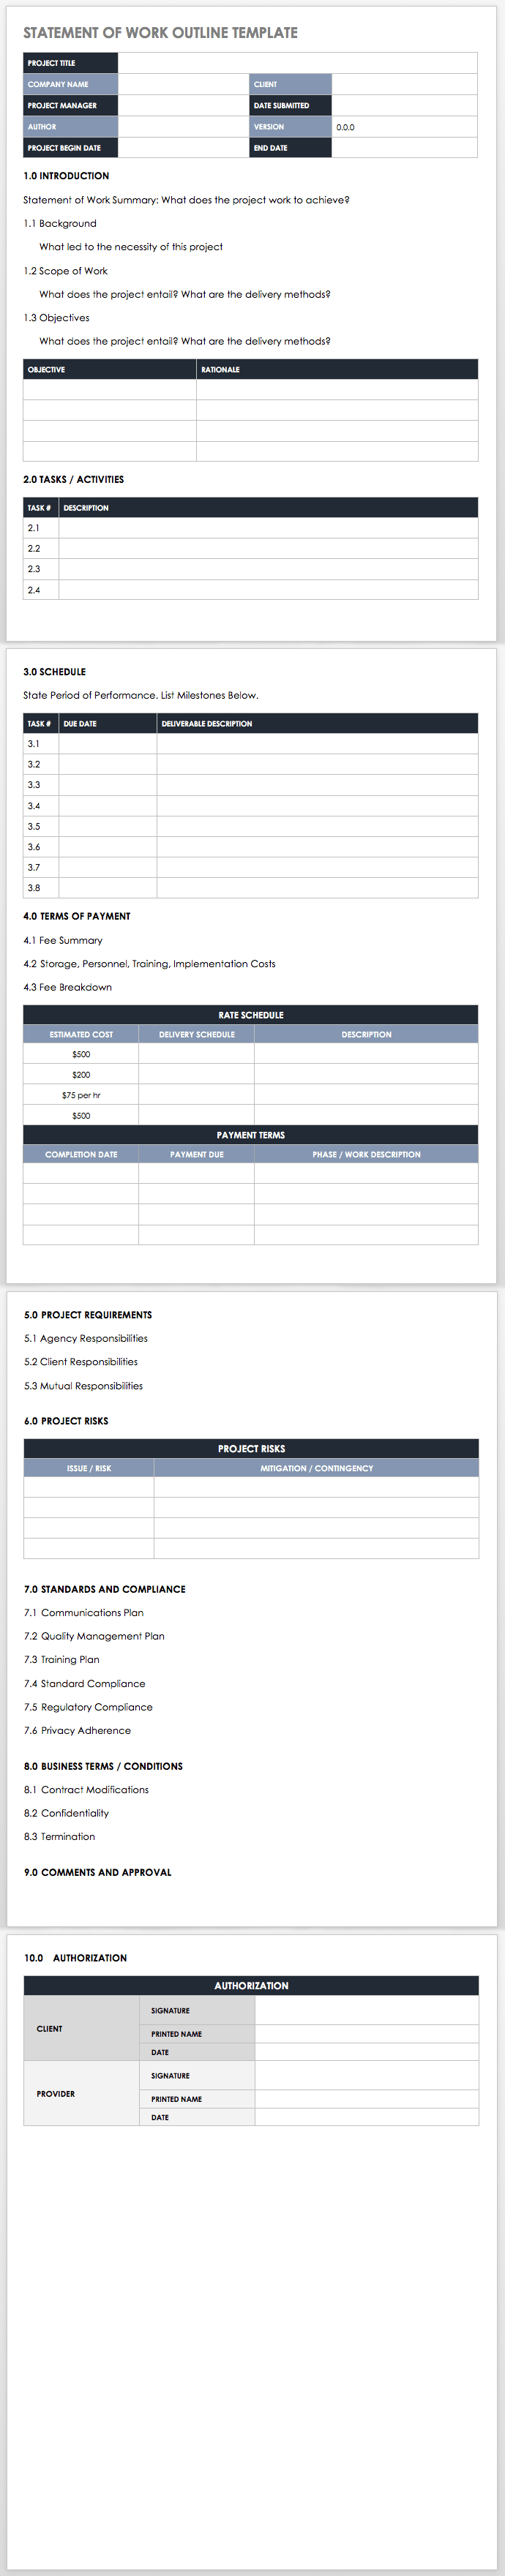 Statement of Work Outline Template